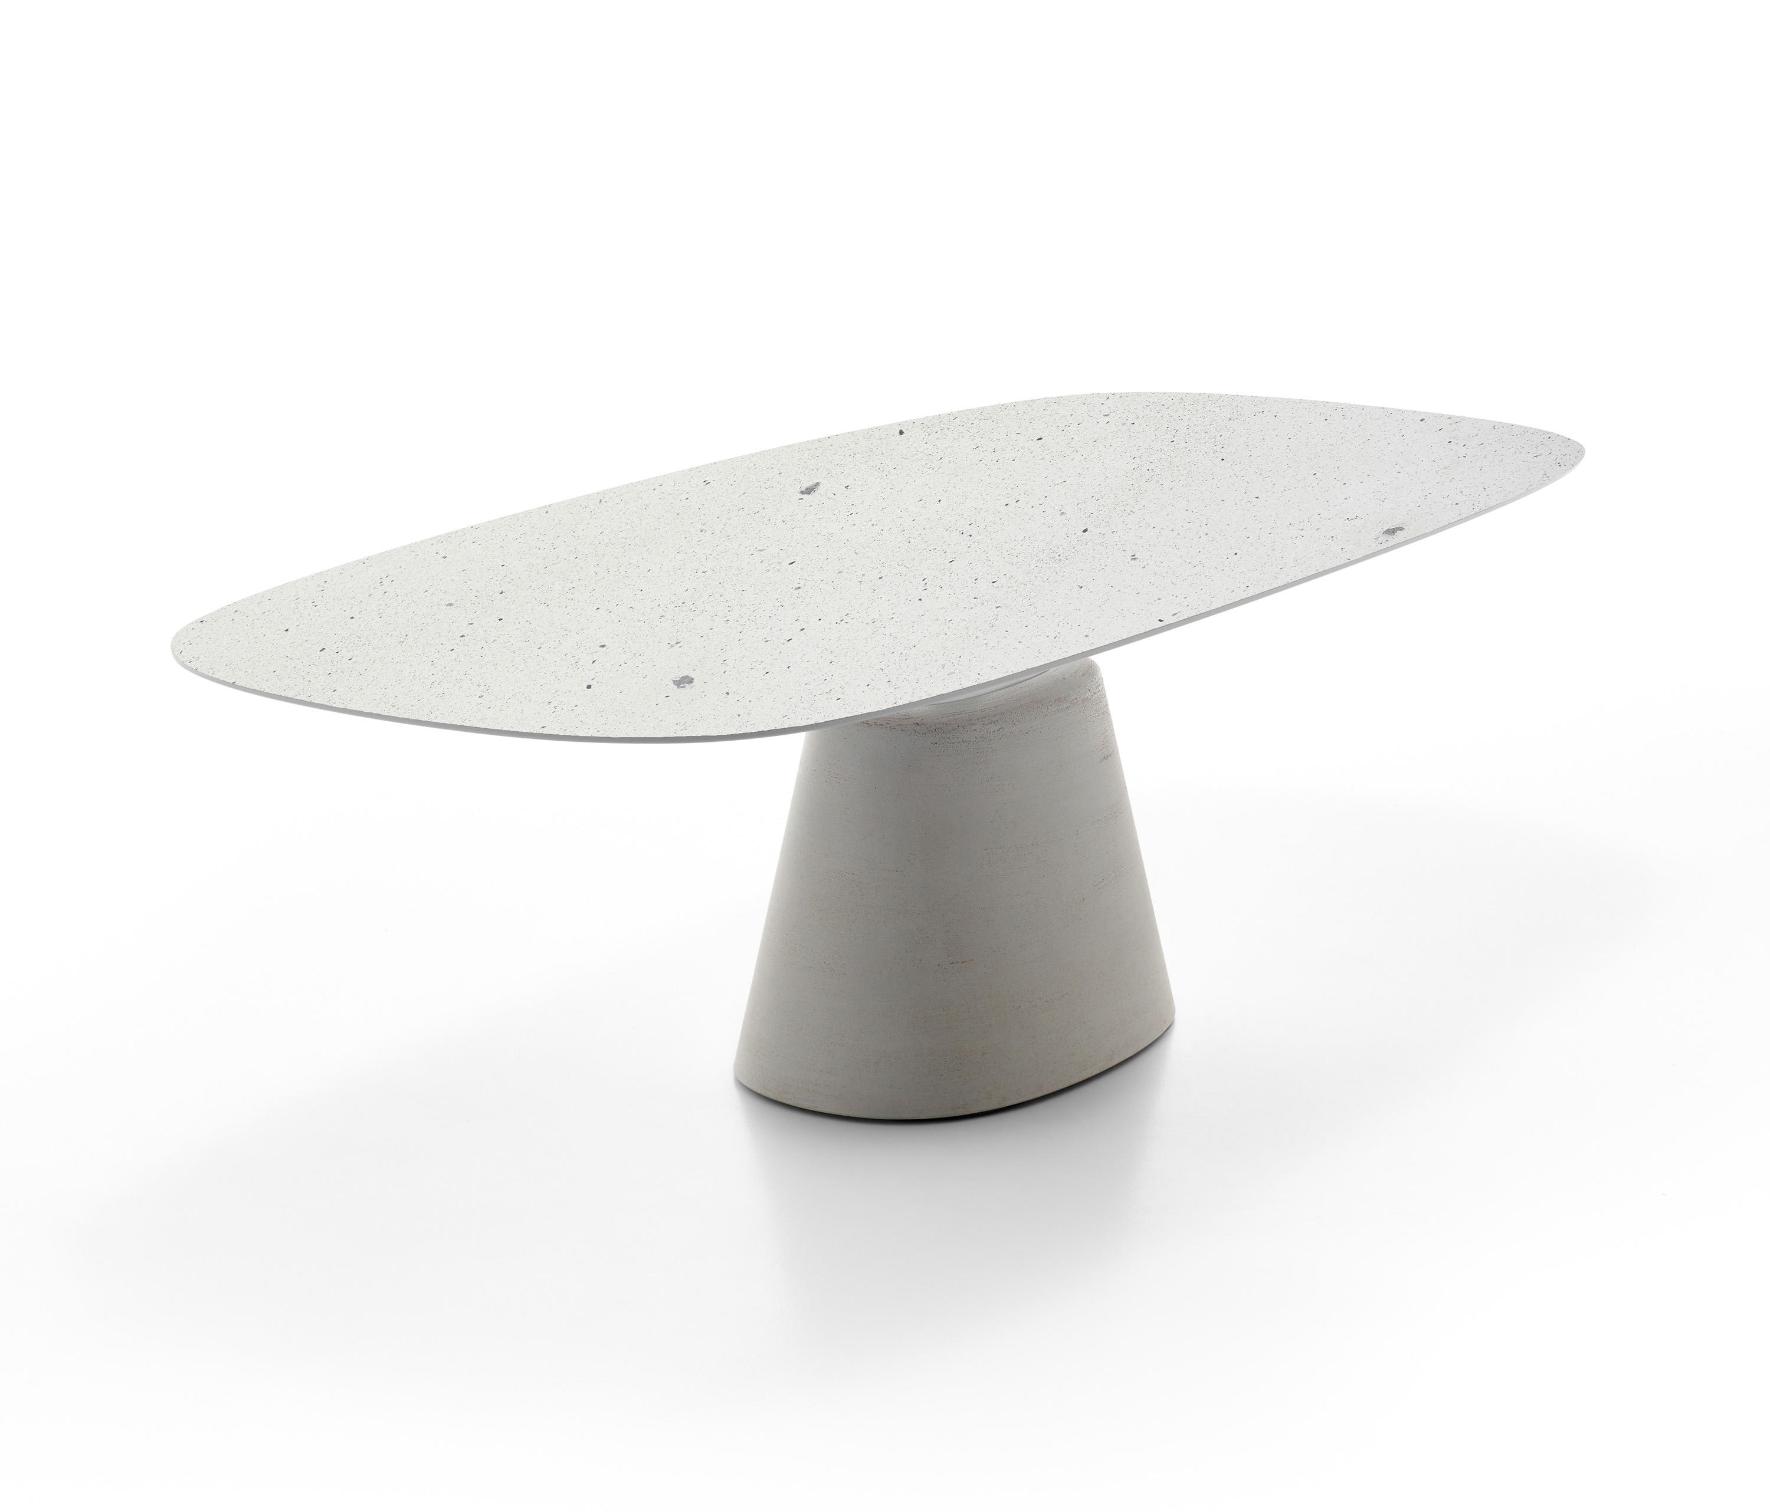 Rock Maxi Italian Indoor / Outdoor Table ☞ Structure: Cement Natural X080 ☞ Top: White Cement ☞ Dimensions: 115 x 240 cm